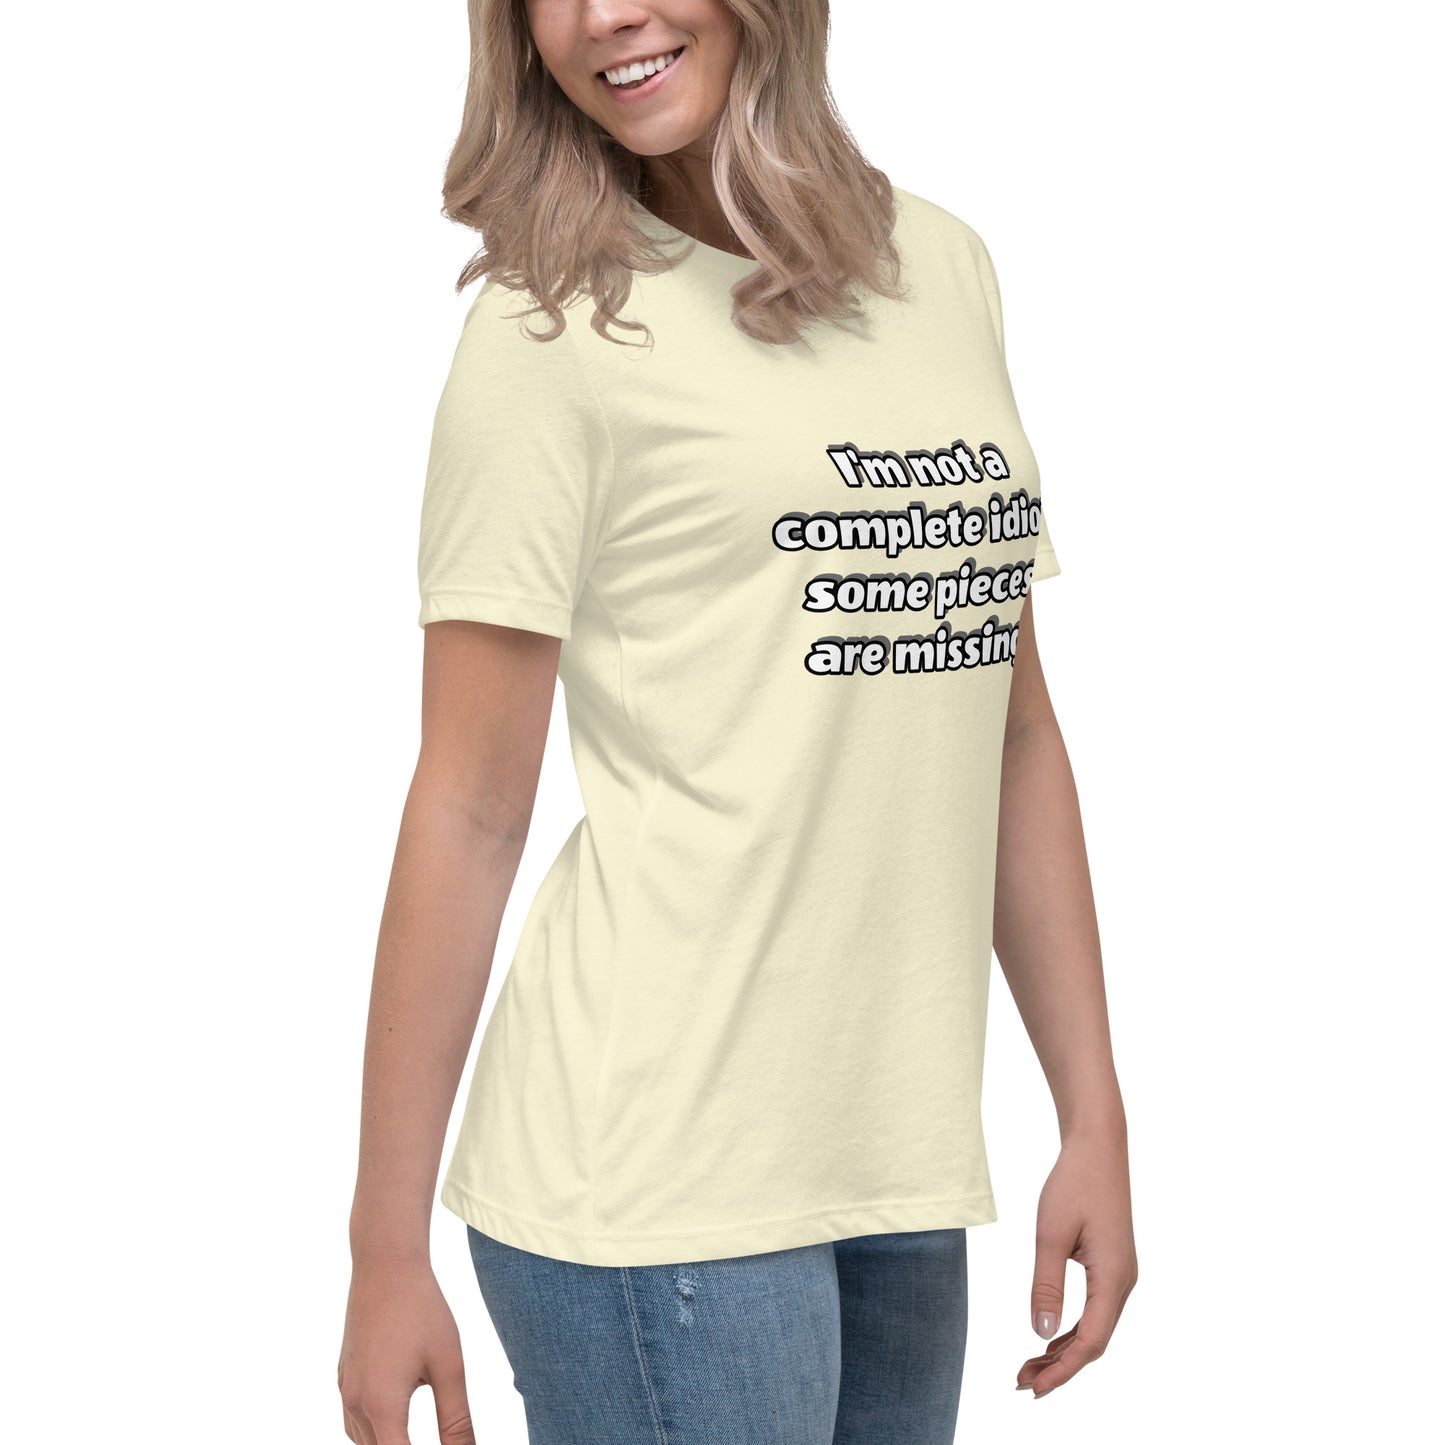 Women with citron yellow t-shirt with text “I’m not a complete idiot, some pieces are missing”